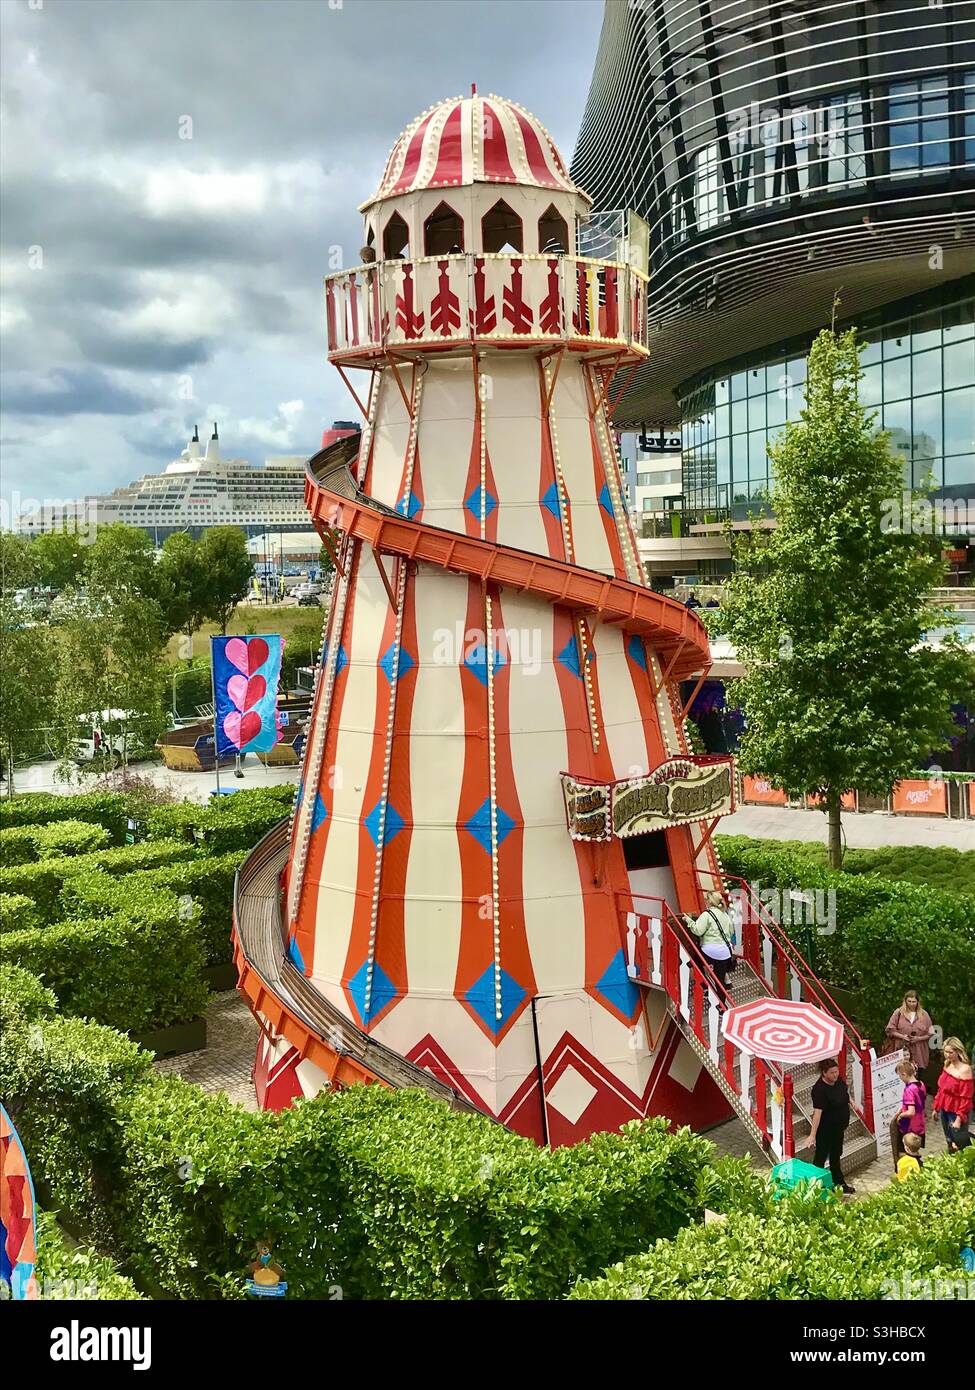 Helter skelter in west quay Southampton Stock Photo